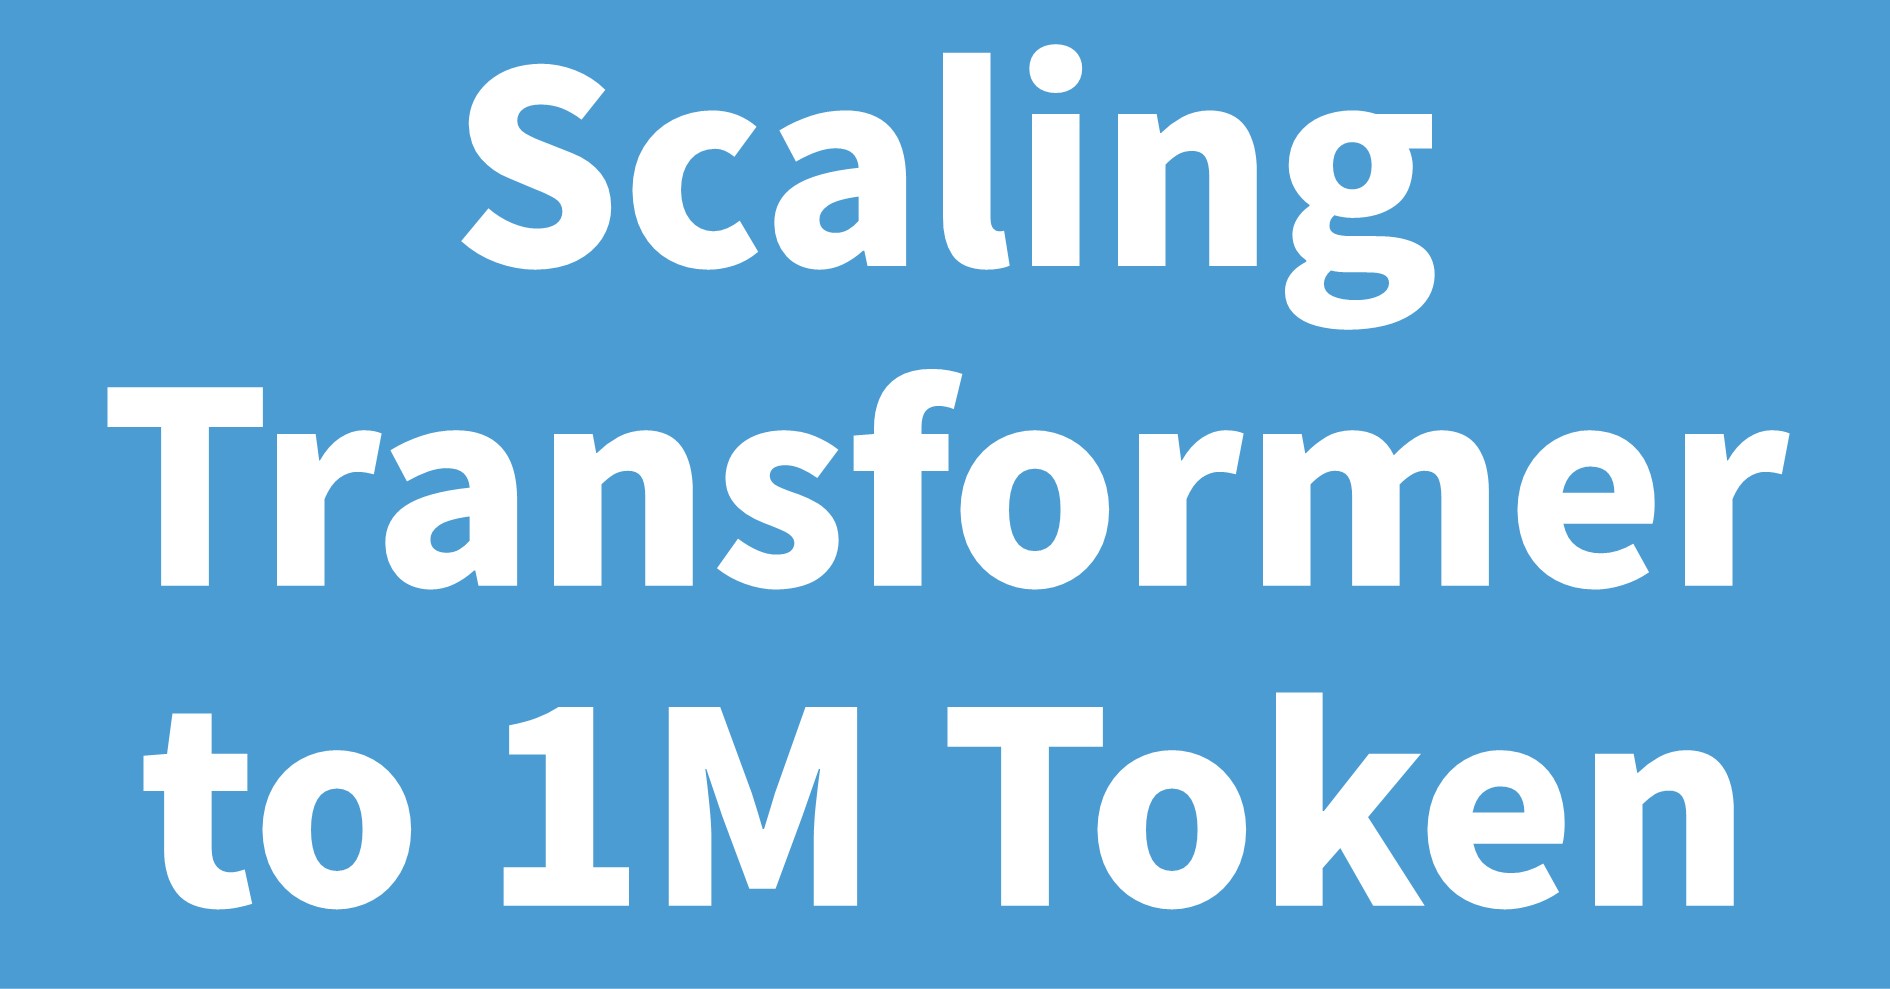 Scaling Transformer to 1M tokens